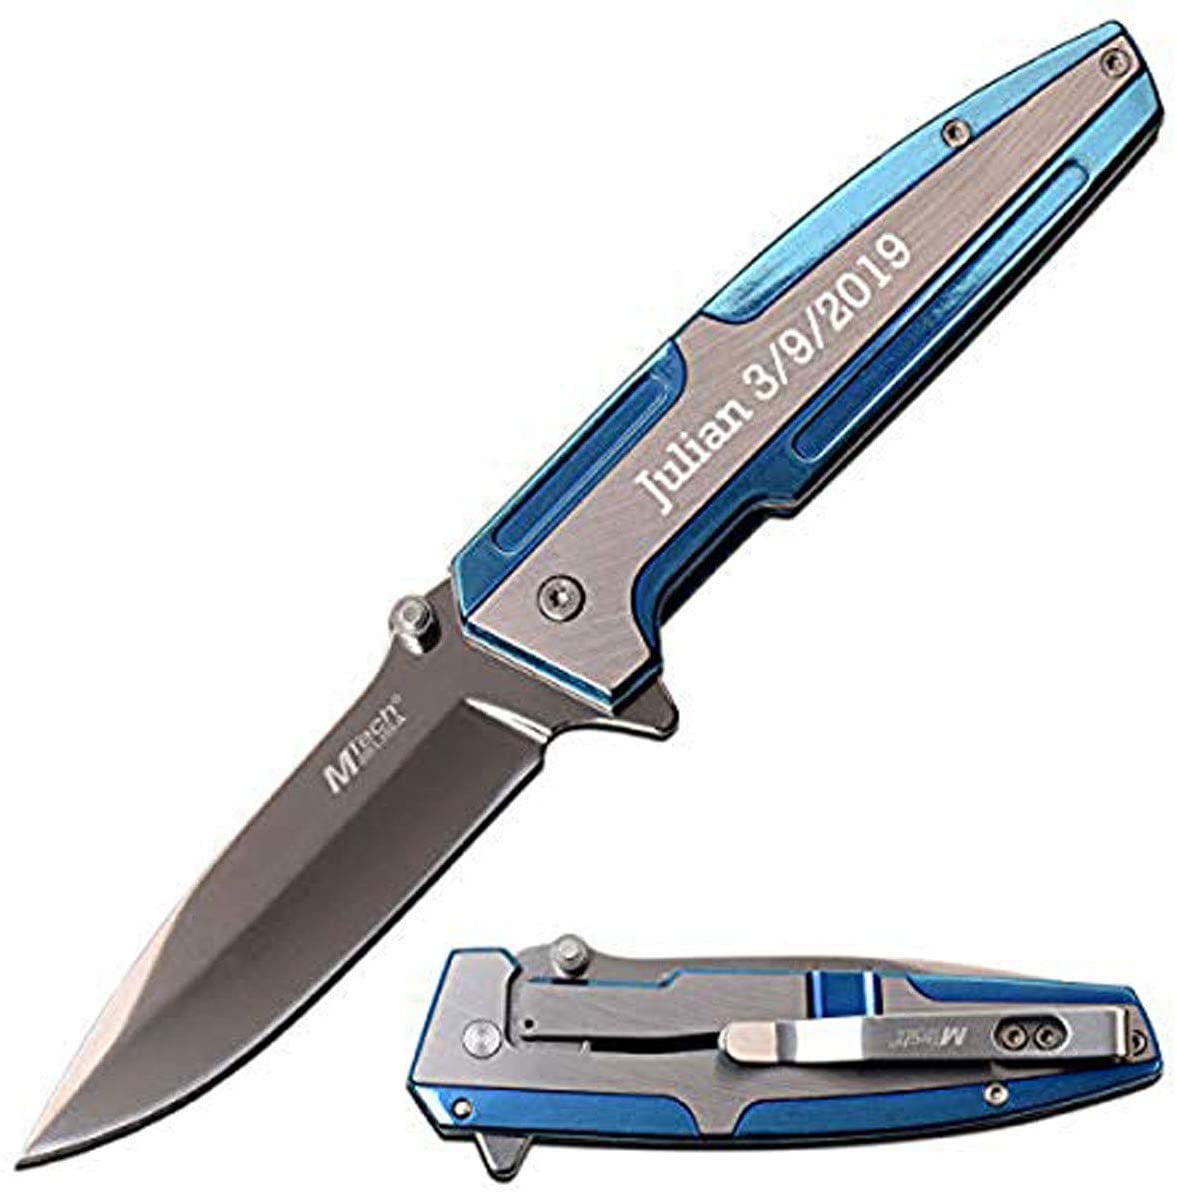 GIFTS INFINITY Pocket Folding Knife, Sharp Stainless Steel Blade, 4.75" Tinite Coated Two Tons Stainless Steel Handle